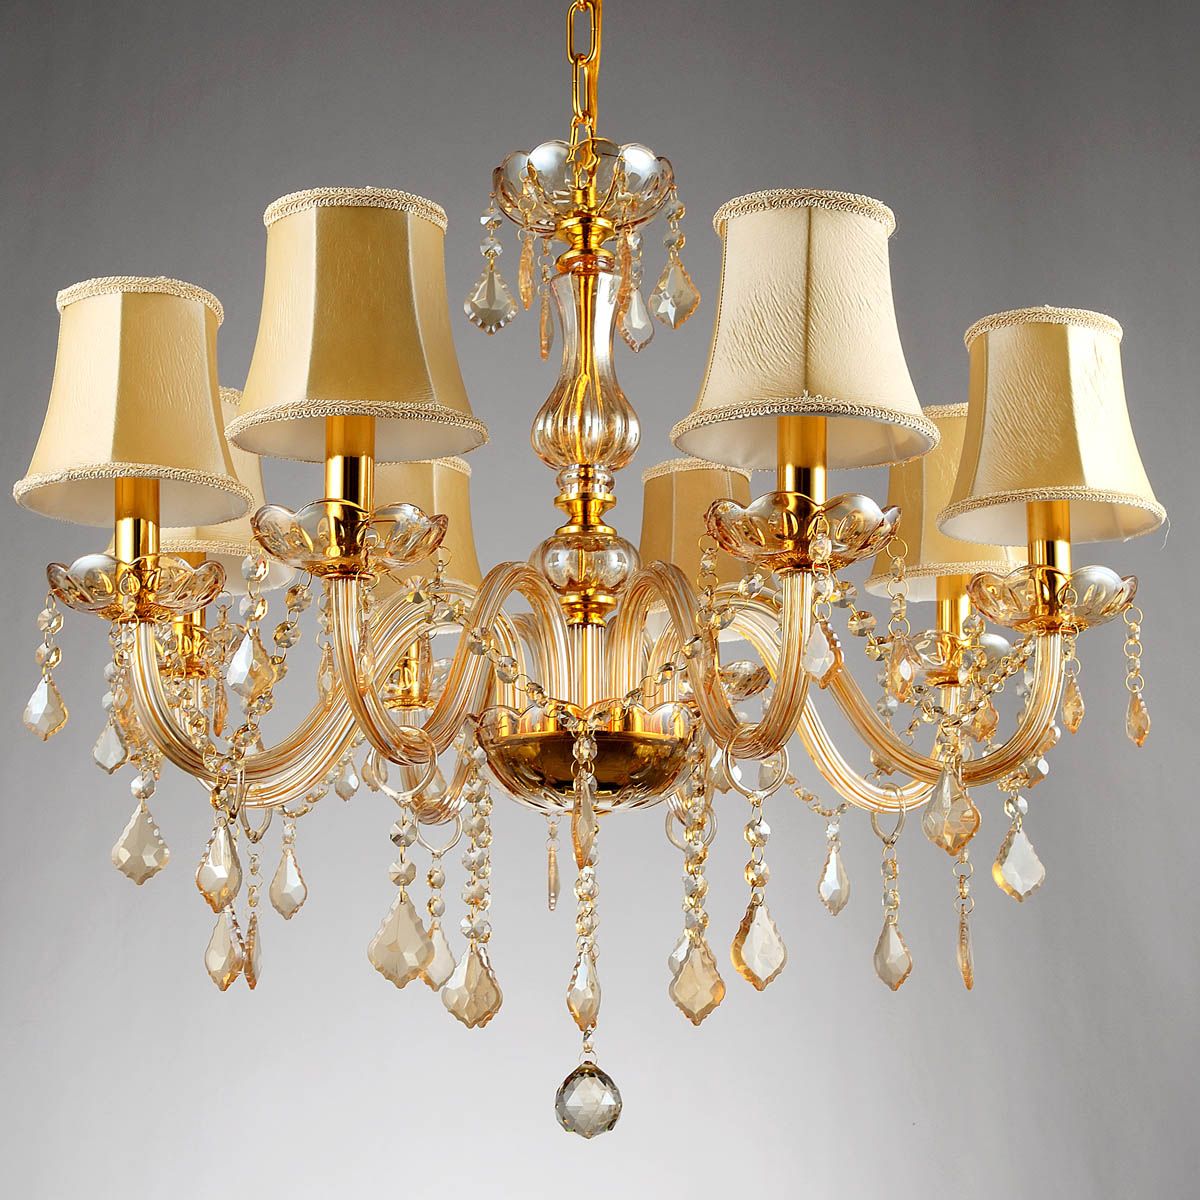 Free Ship 6/8 Arms Fashion Crystal Chandelier Lighting Inside Most Recent Champagne Glass Chandeliers (View 4 of 20)